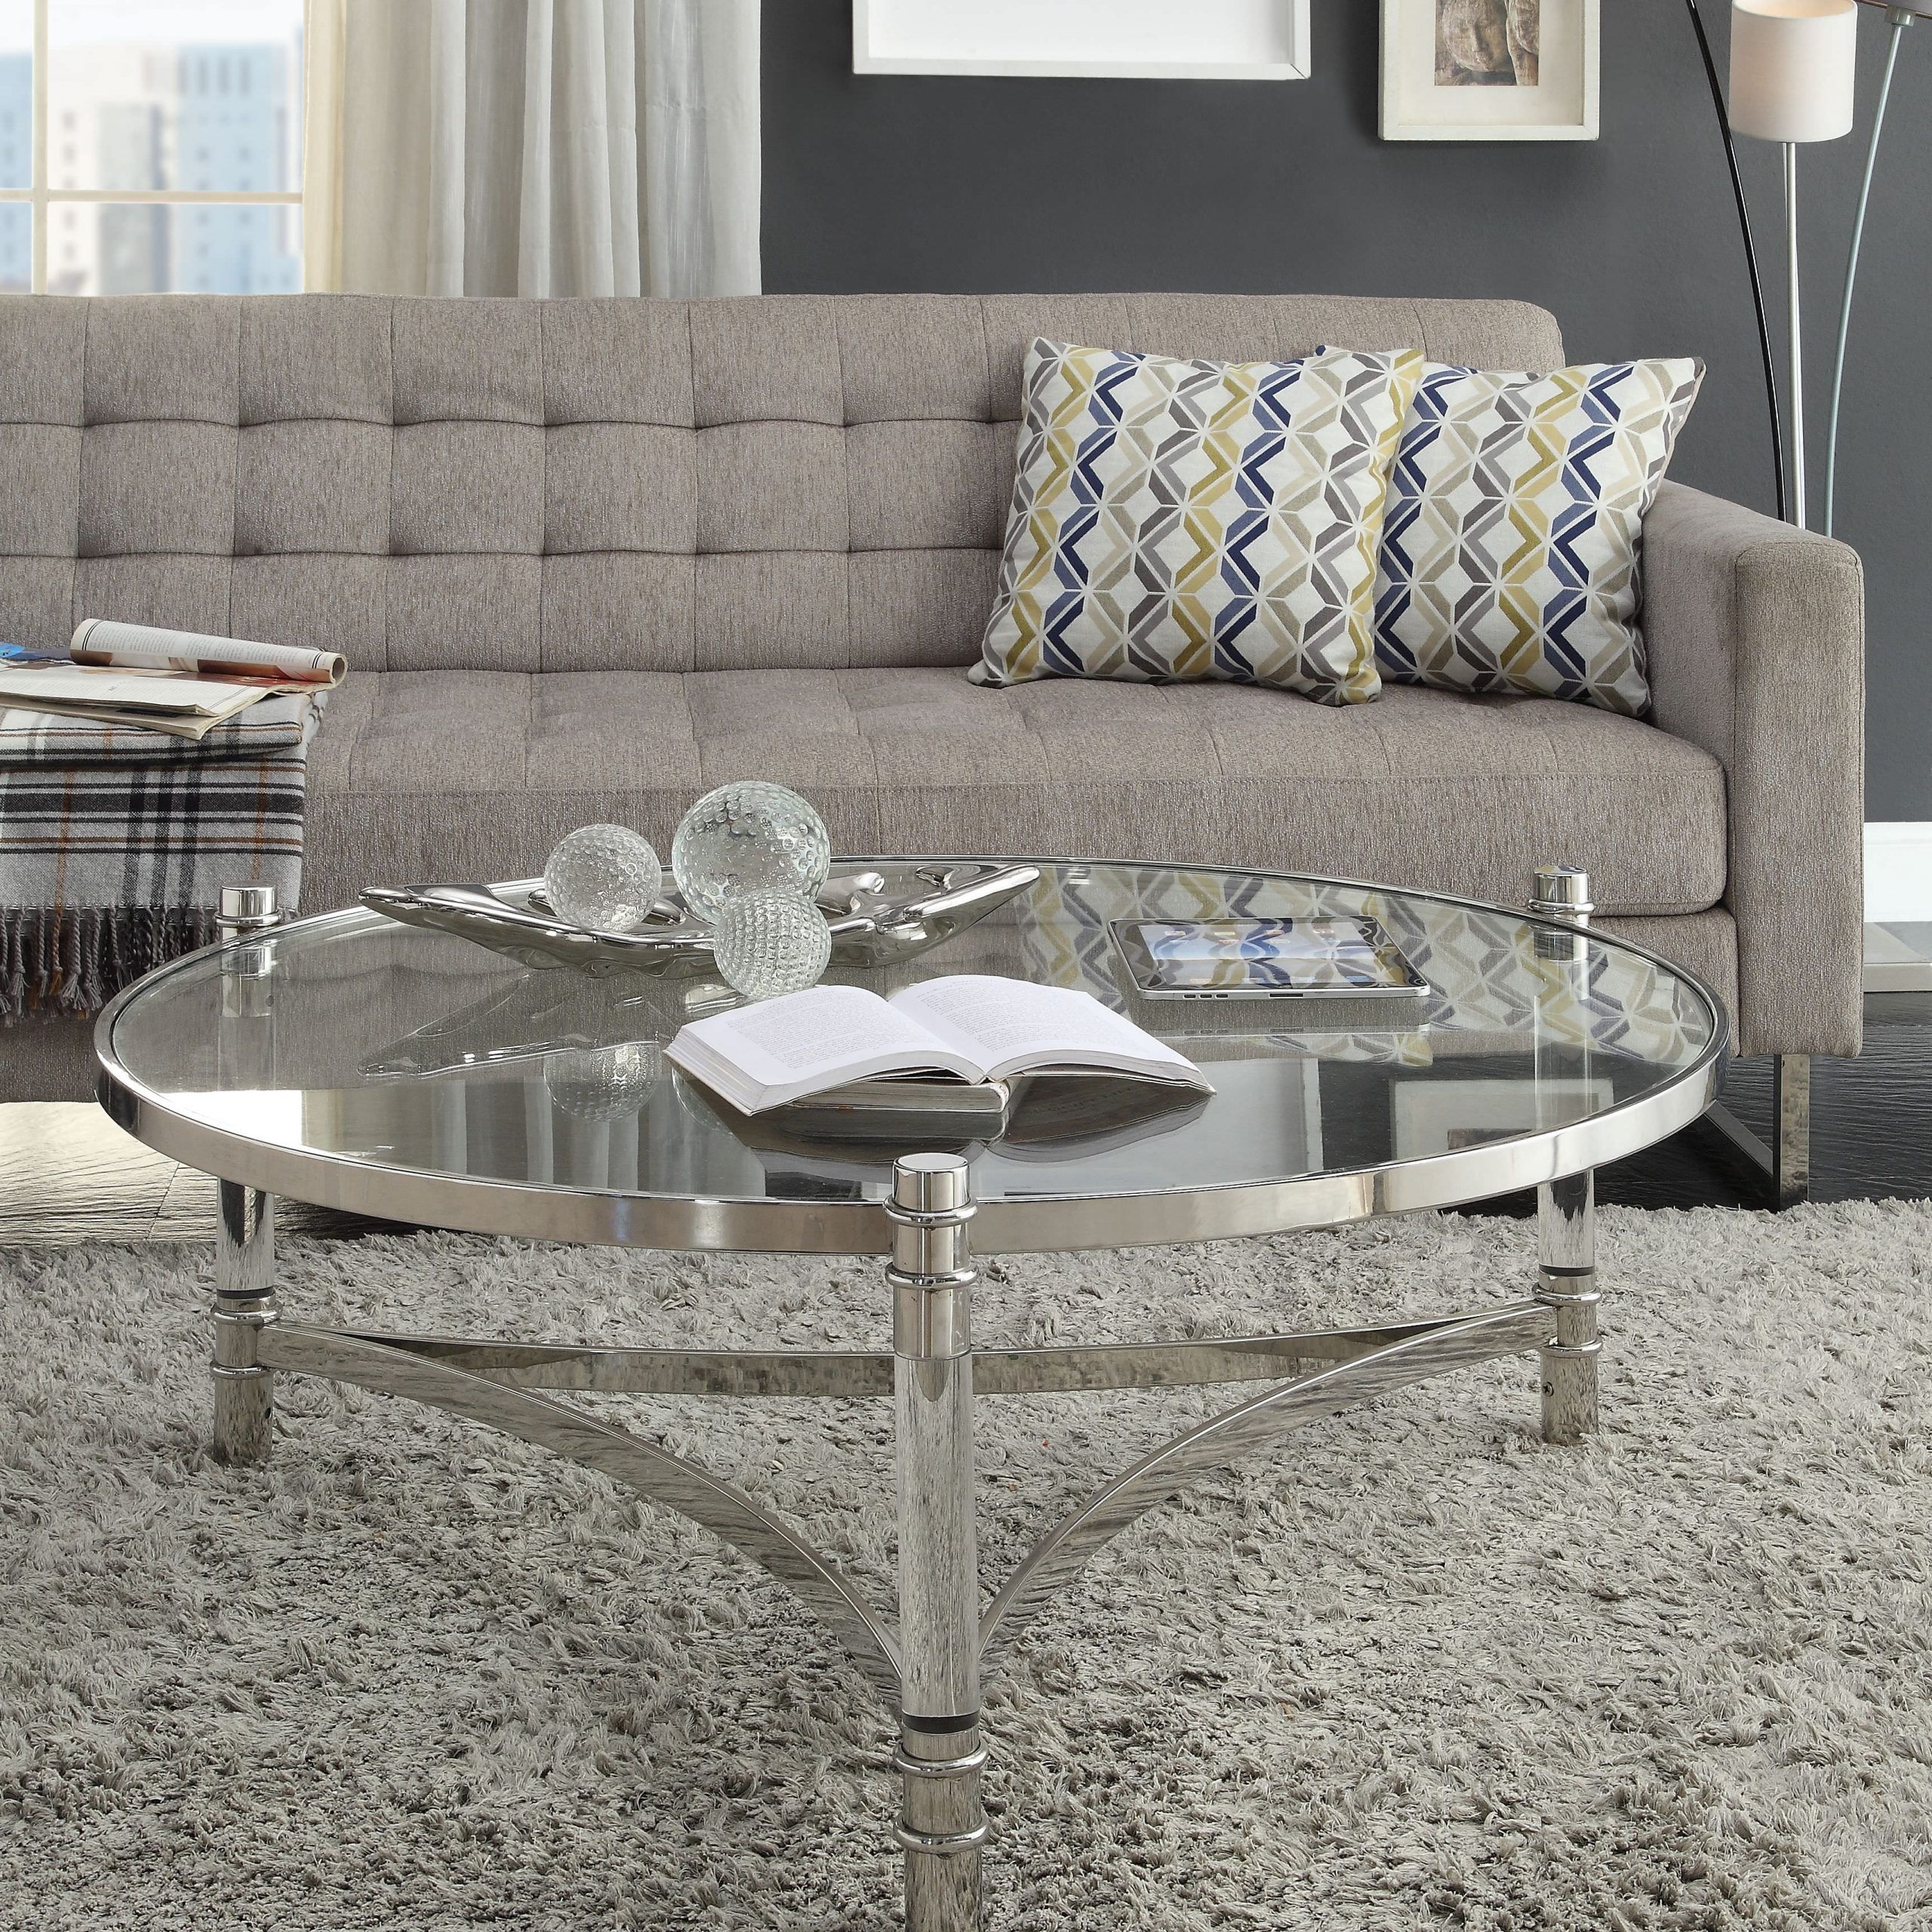 Most Recent Acme Peony Coffee Table In Clear Acrylic, Steel And Clear Glass With Clear Acrylic Coffee Tables (View 6 of 10)